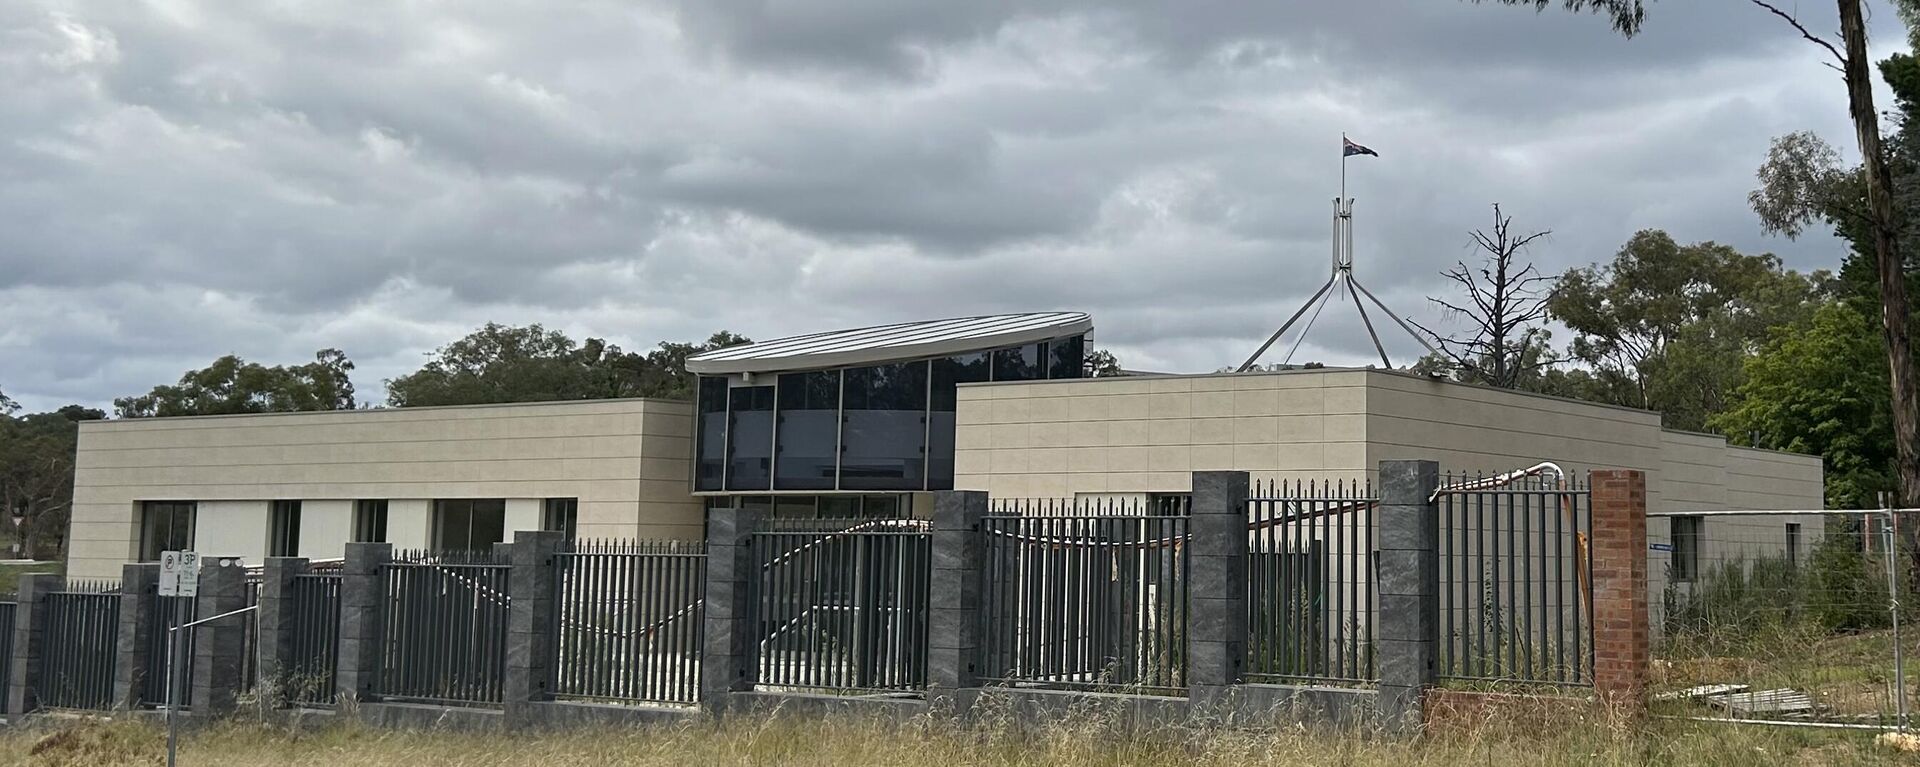 The Australian flag flies on Parliament House, seen behind an unoccupied building on the grounds of a proposed new Russian embassy near the Australian Parliament in Canberra - Sputnik International, 1920, 27.06.2023